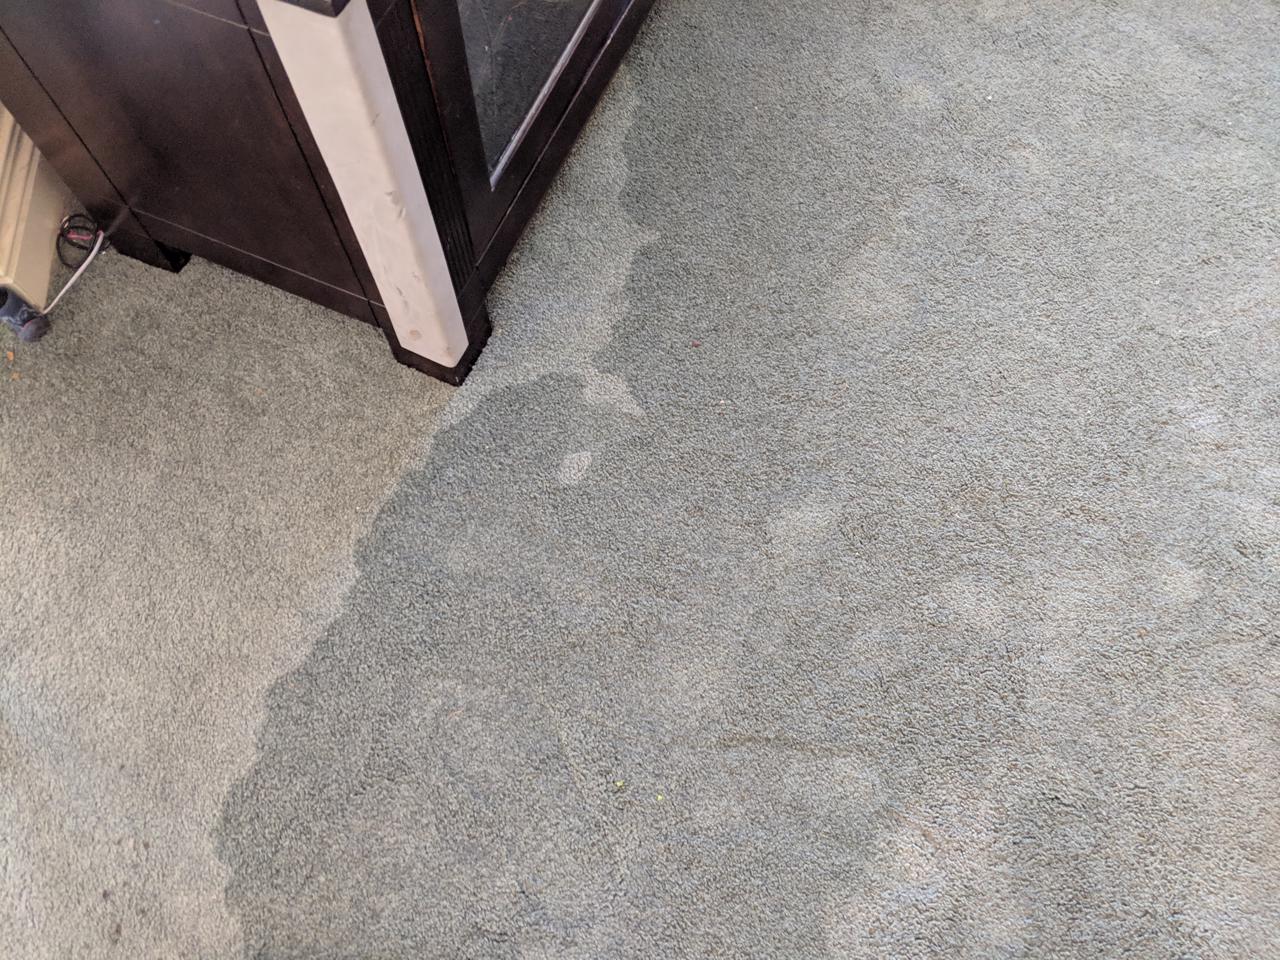 Should Carpet Be Replaced After Water Damage?